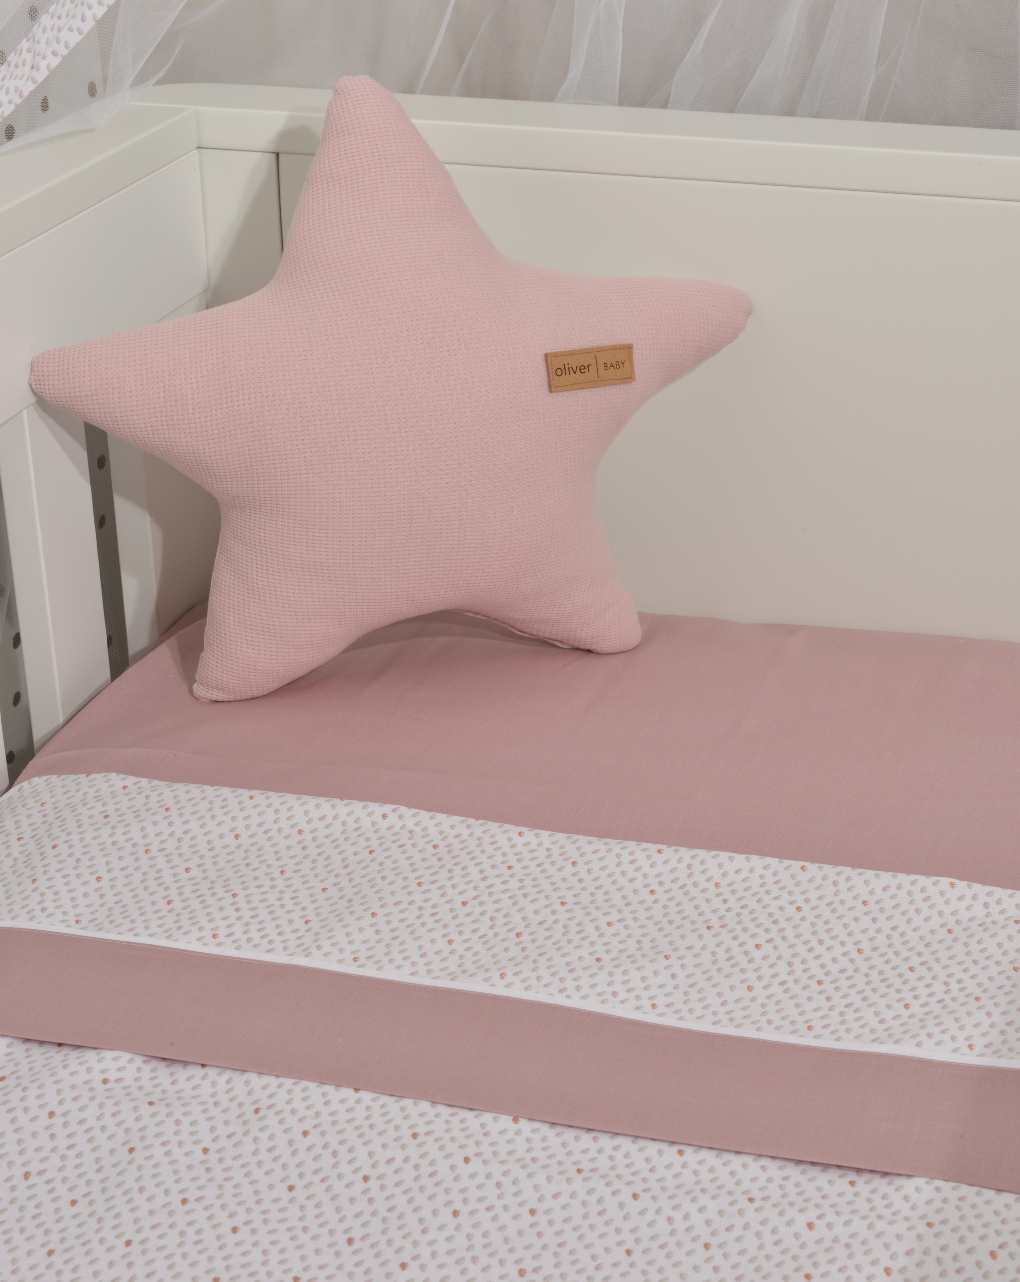 Baby oliver σετ σεντόνια λίκνου x2 dusty pink 46-6704-402 - BABY OLIVER